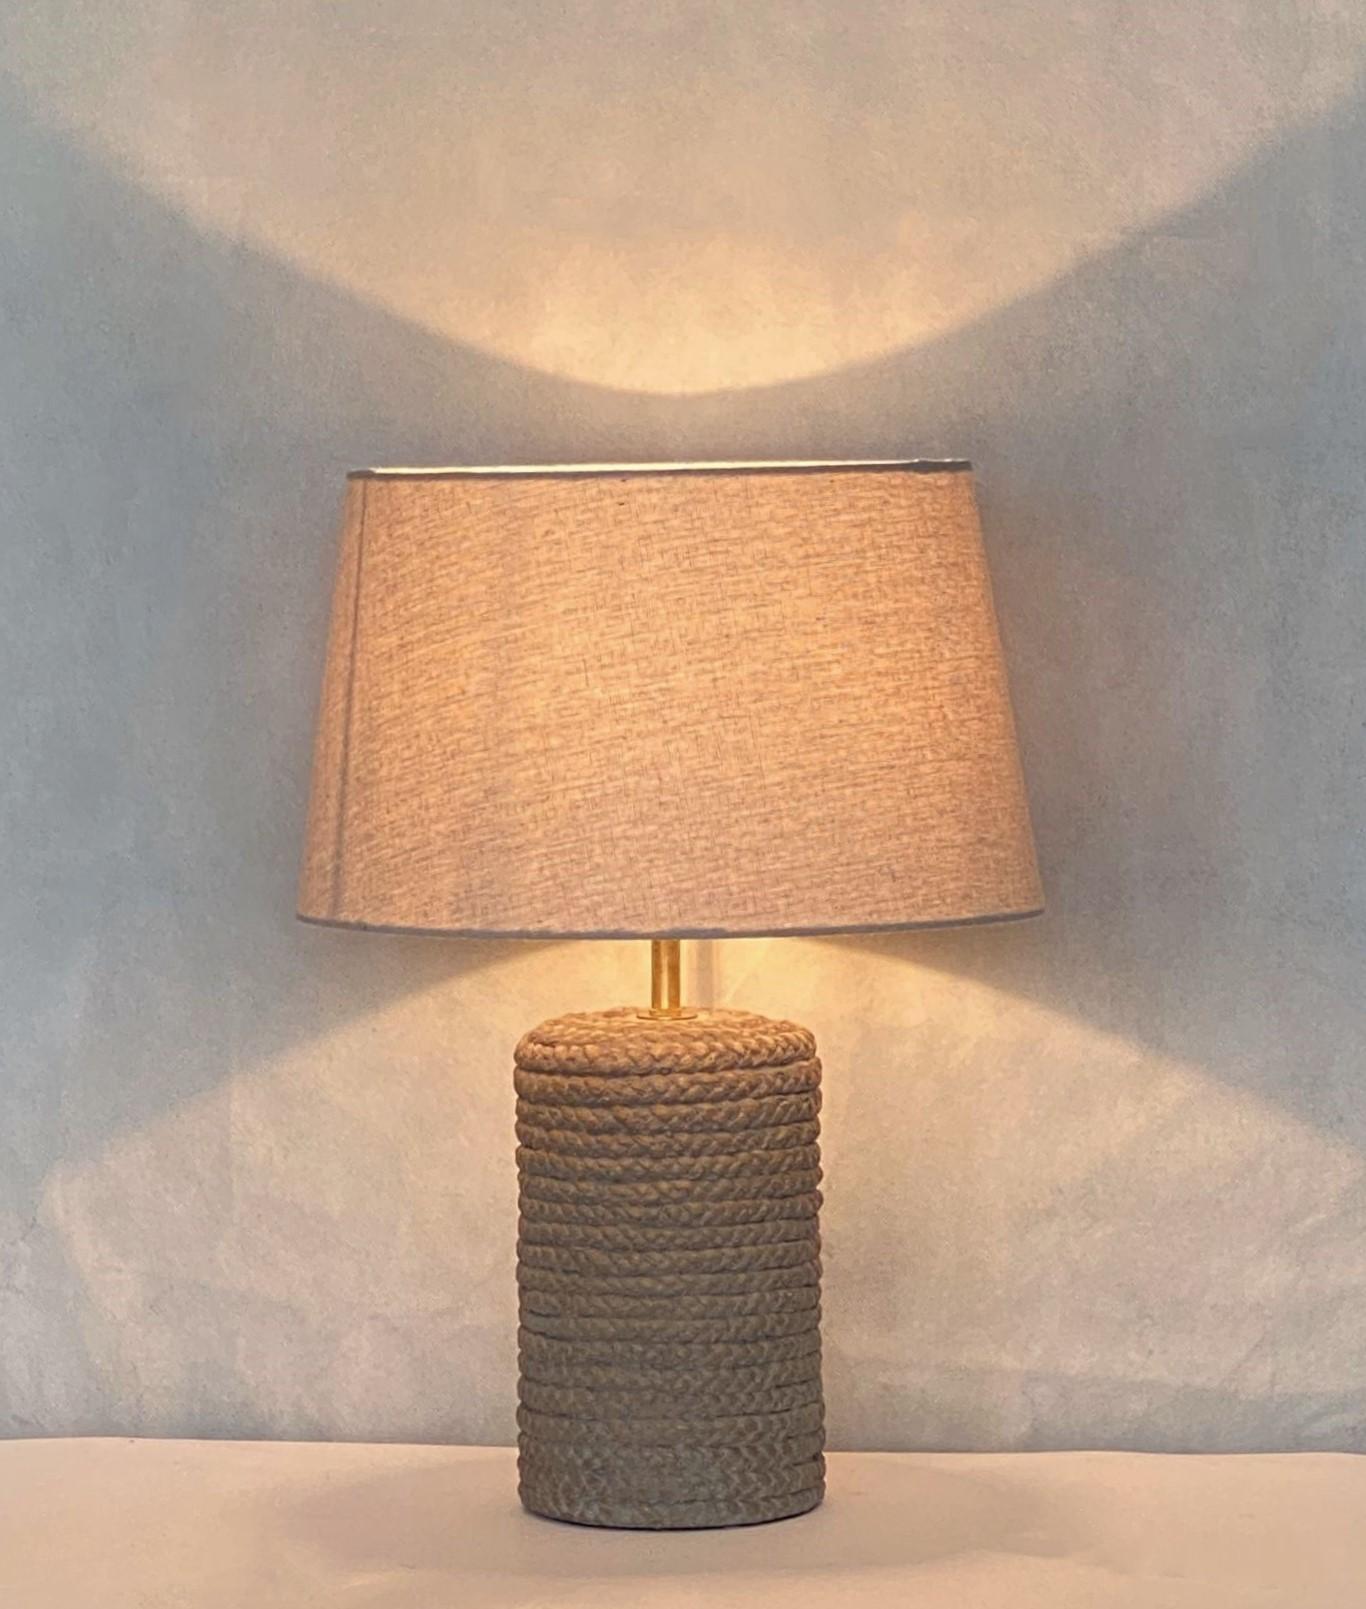 Pair of Scandinavian Ceramic Table Lamps, 1960s, Linen Shades For Sale 1